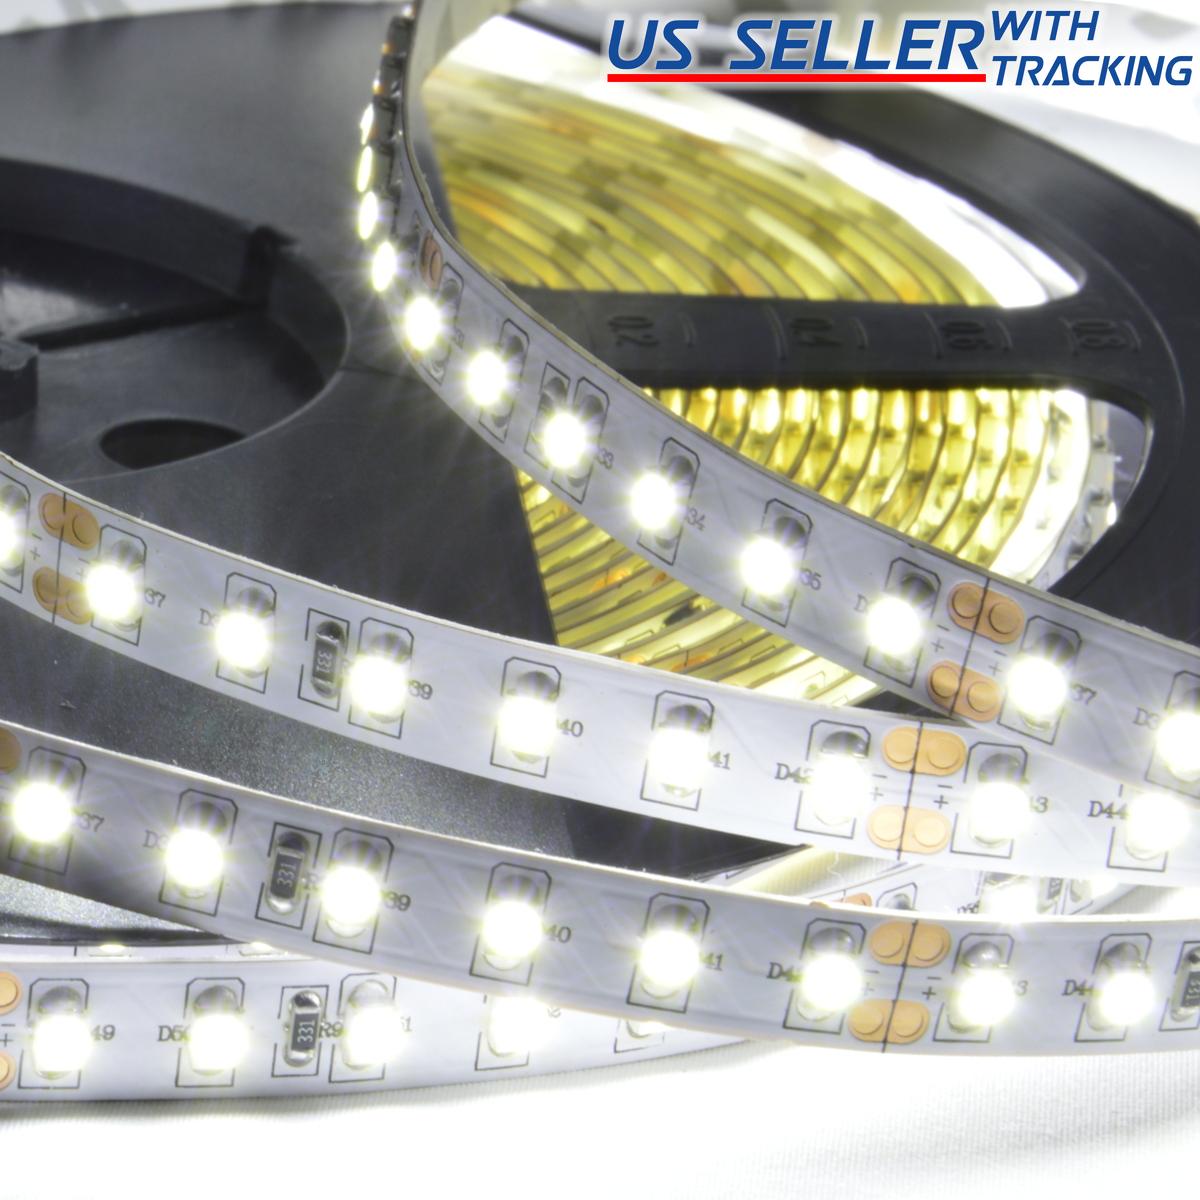 Led Strip Lights Available @ Best Price Online